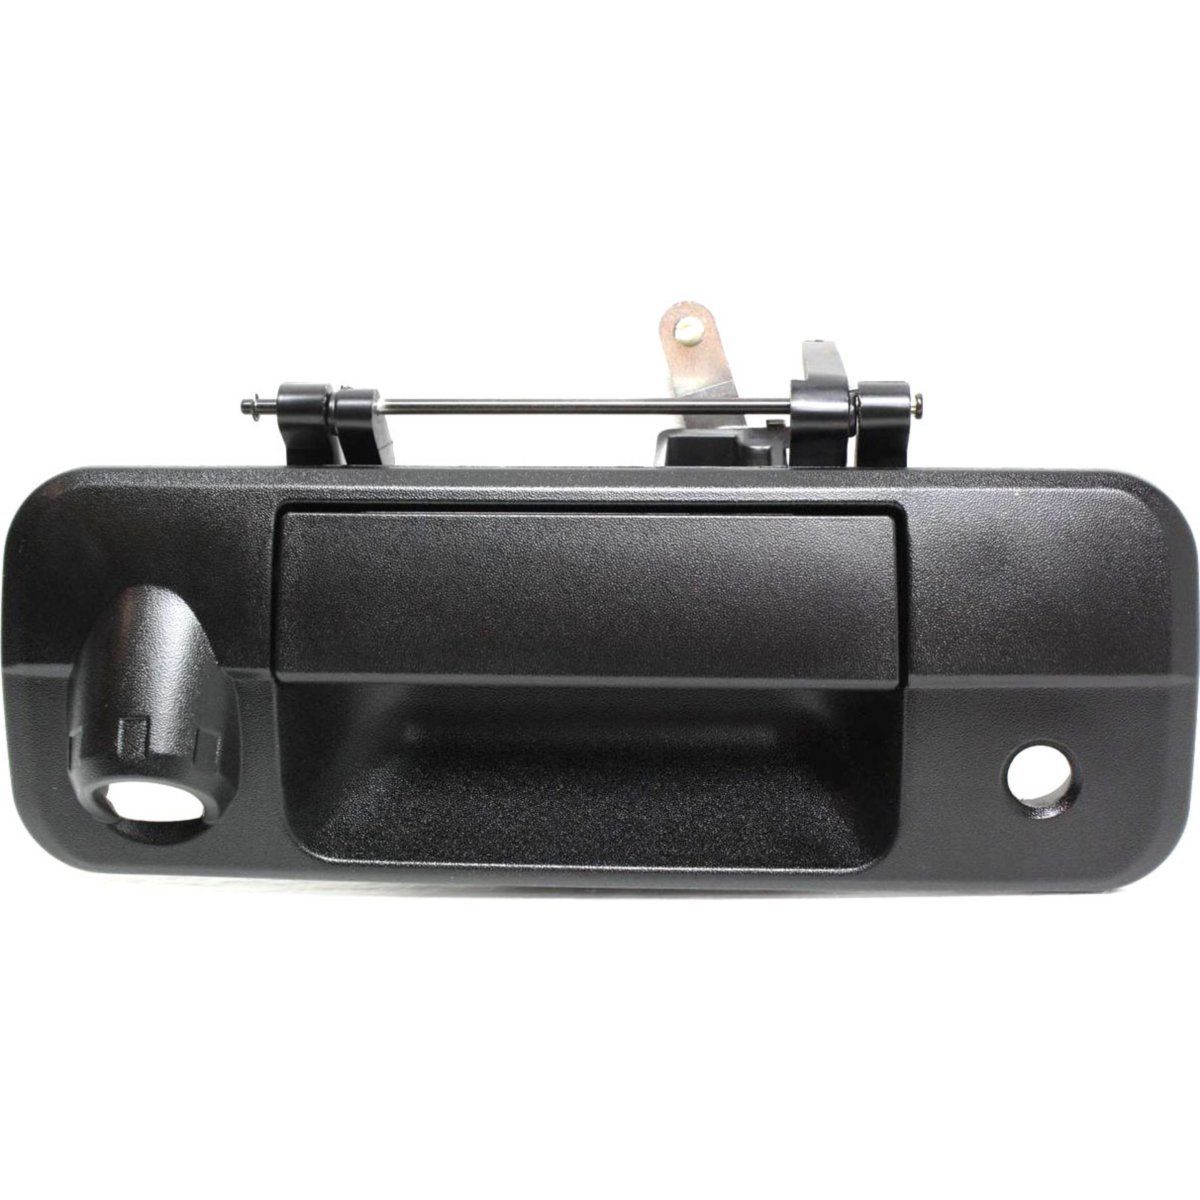 Tailgate Handle For 2007-2013 Toyota Tundra with Rear Camera Hole